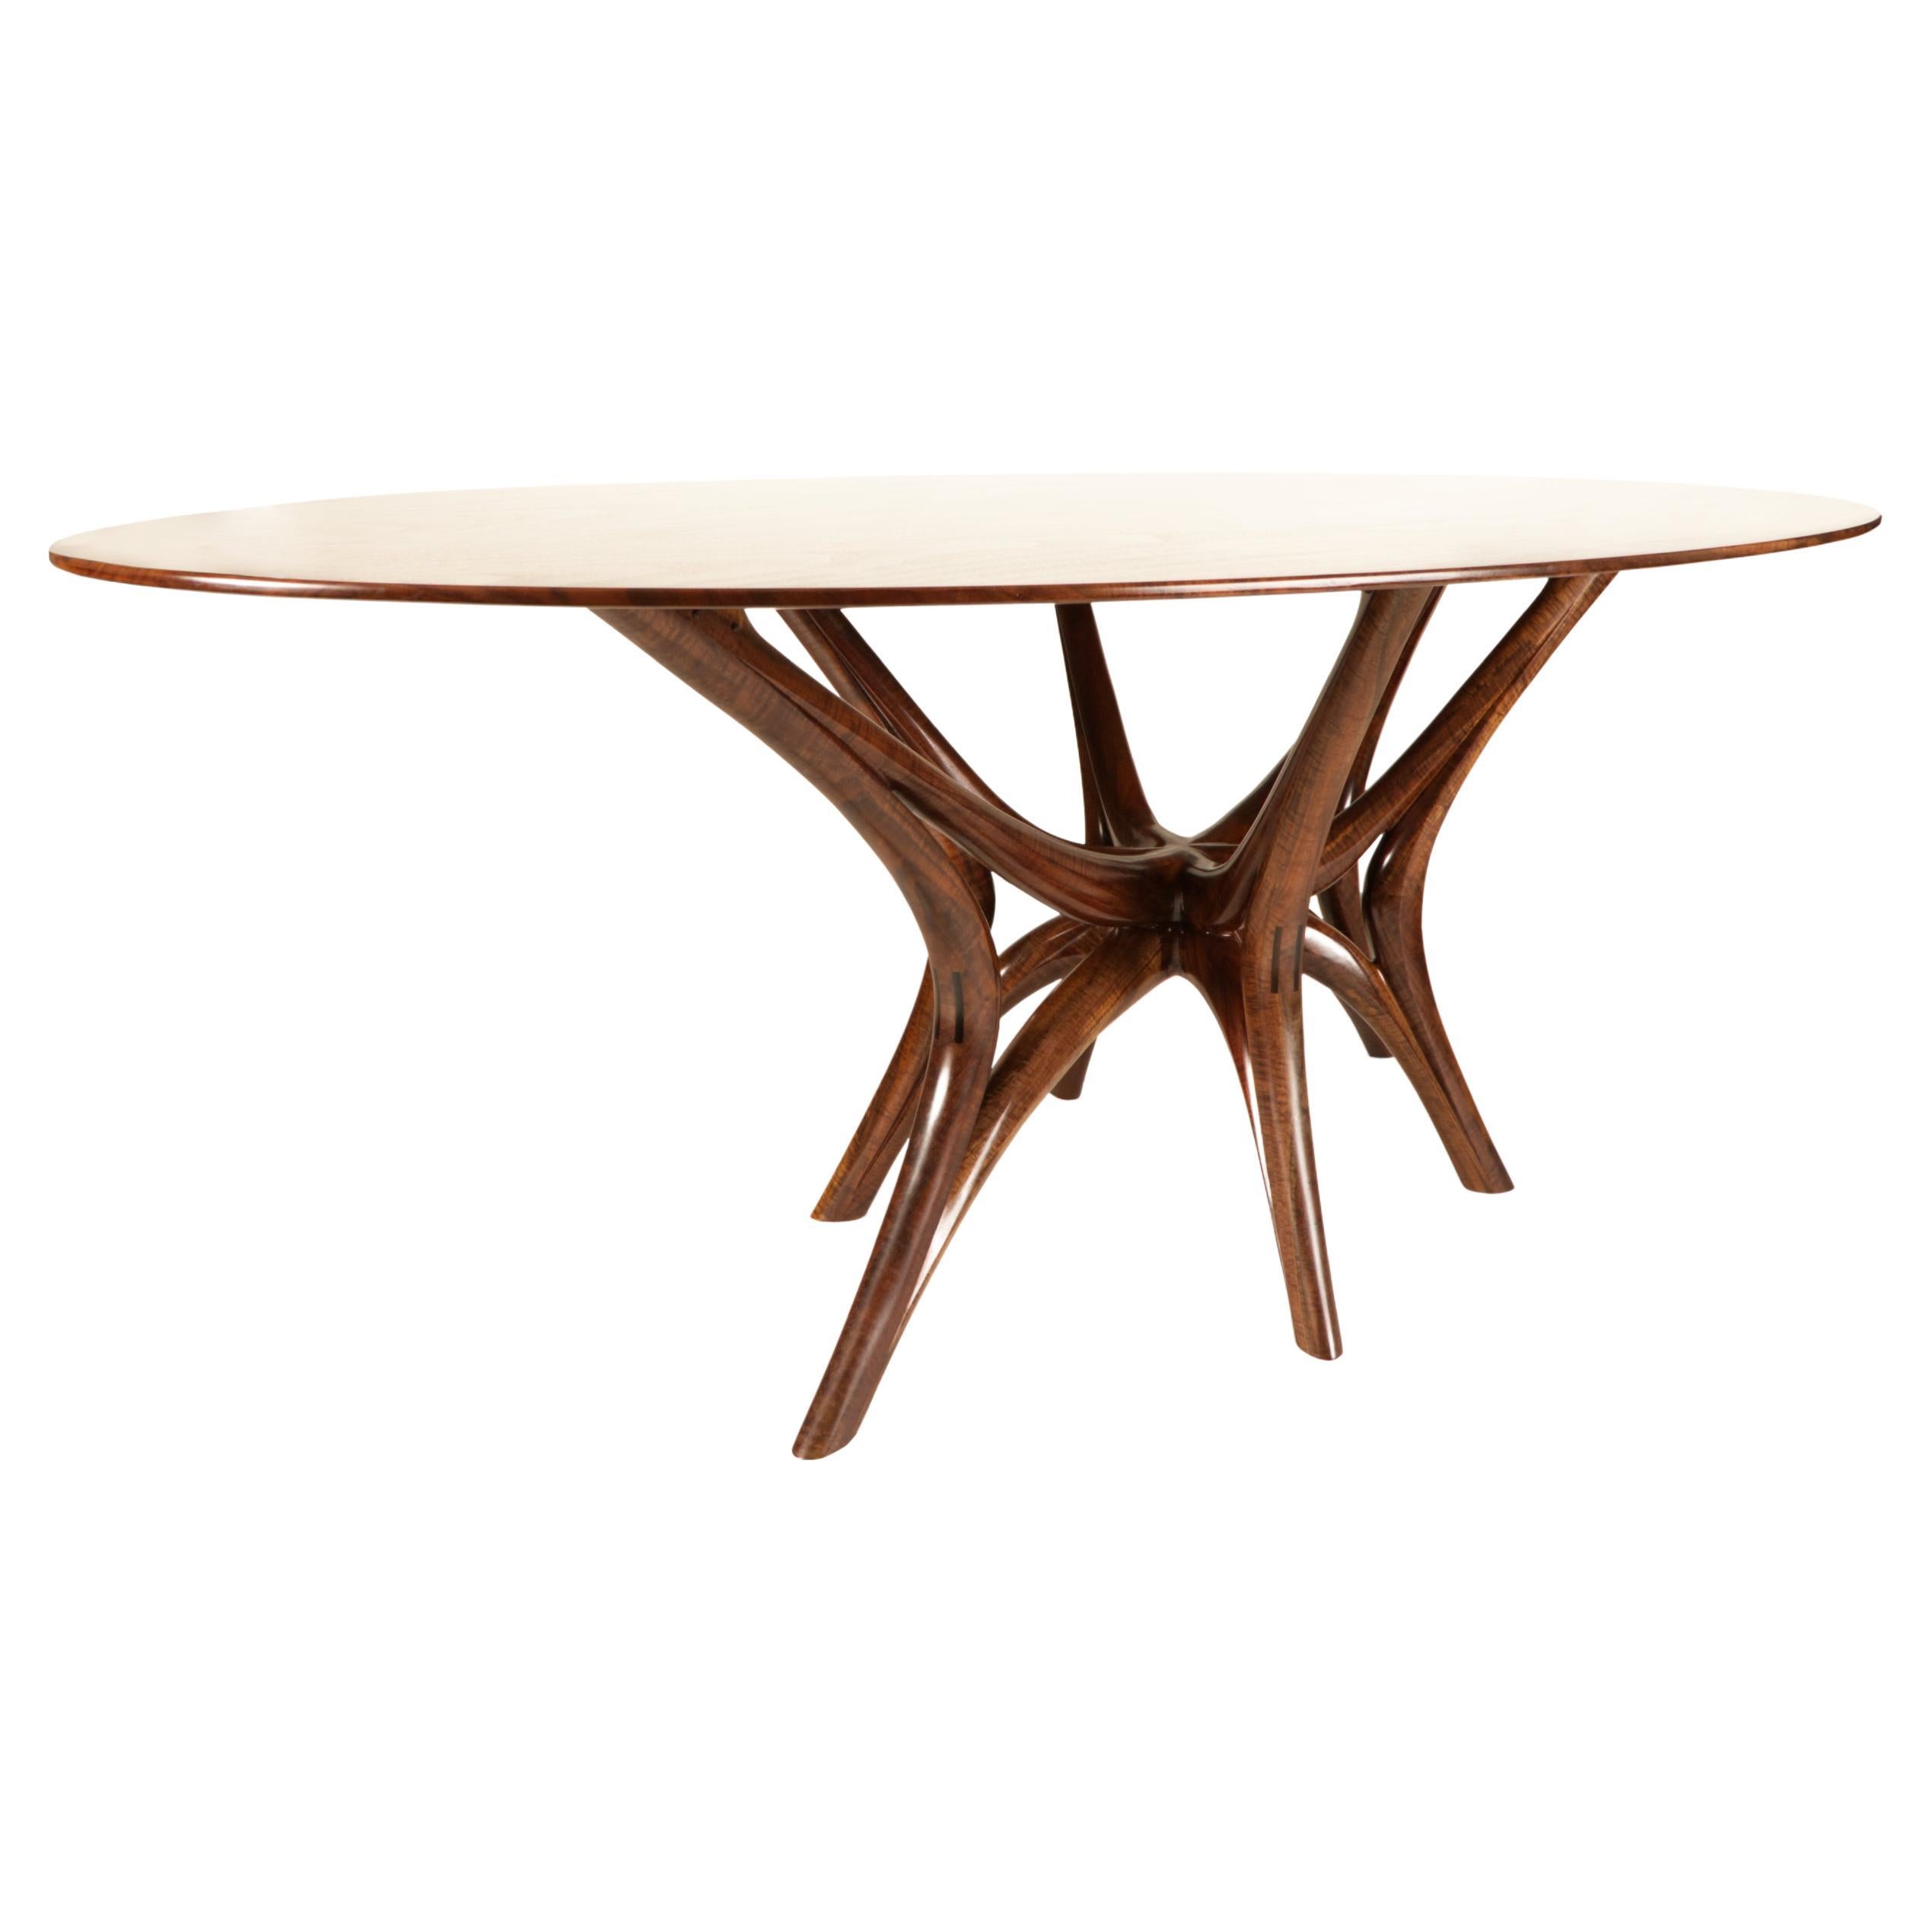 Handcrafted from solid Walnut, this web-leg dining table is a statement in craft and design. It's hand-carved legs offer an incredible sense of movement and the tapered profile of the table top makes it appear to almost be floating in space. This